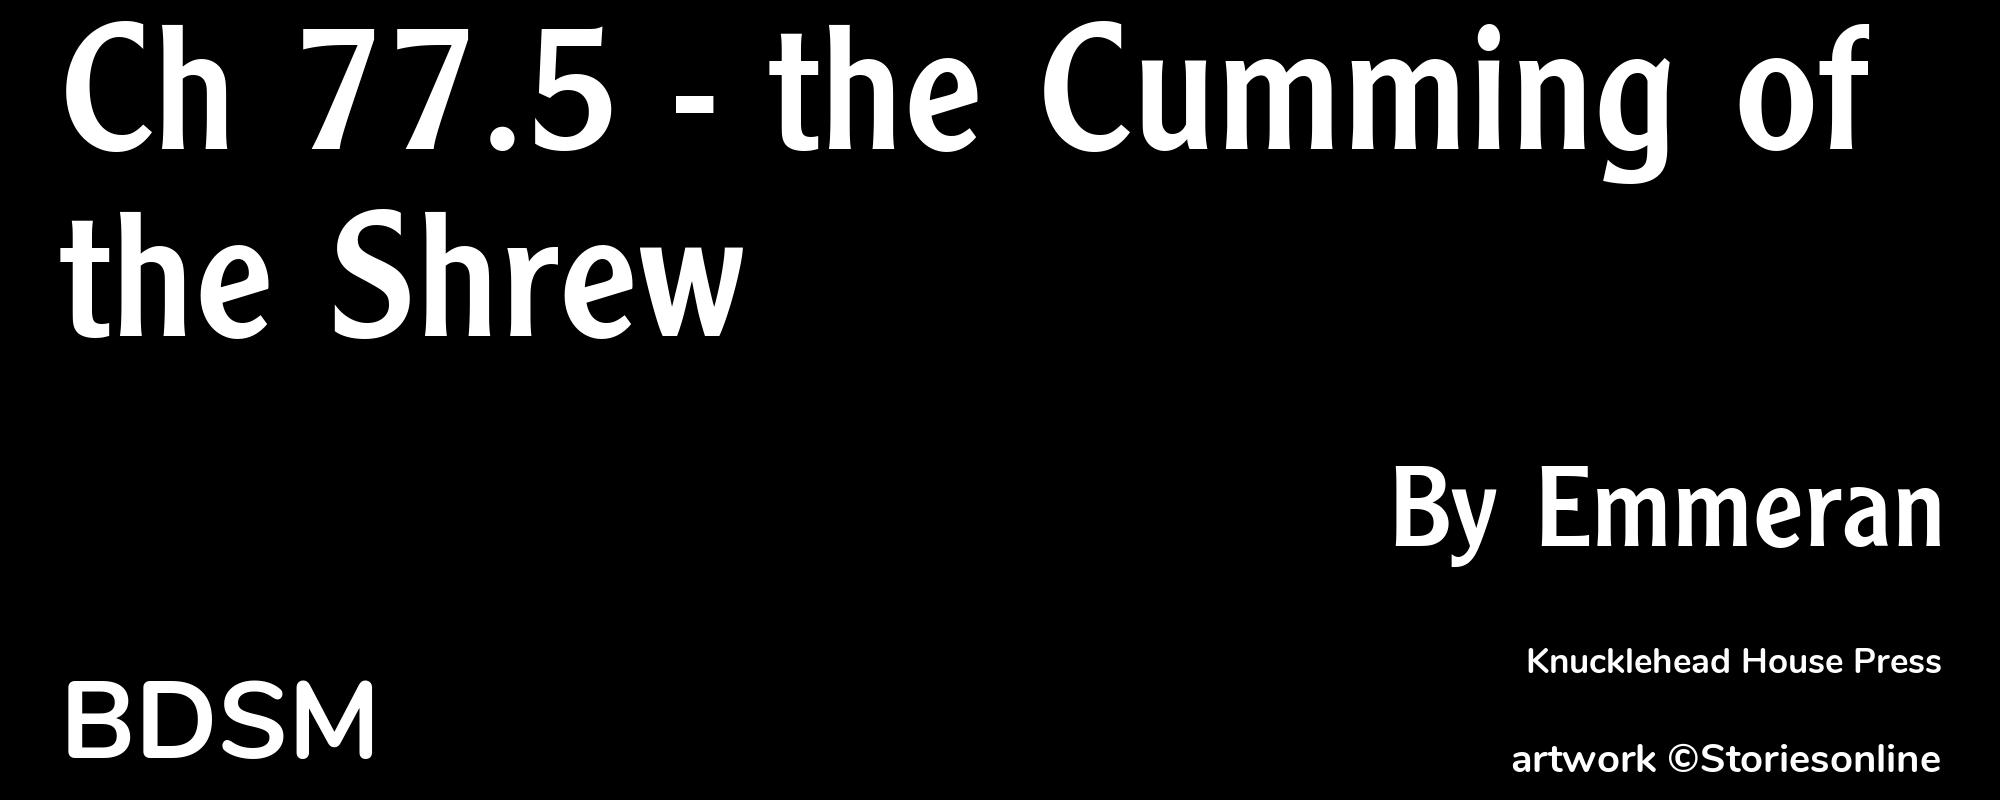 Ch 77.5 - the Cumming of the Shrew - Cover